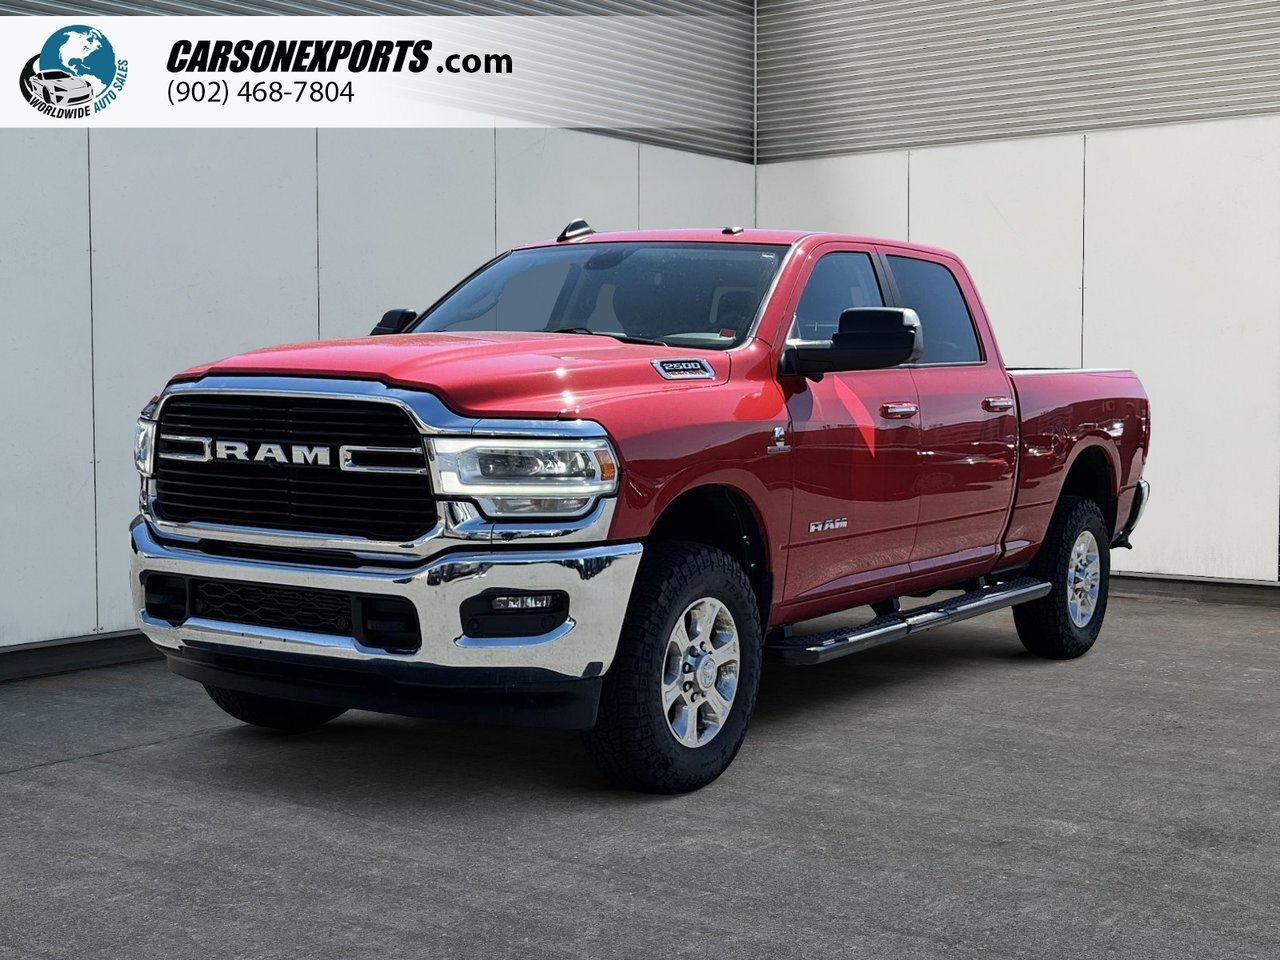 2019 Ram 2500 Big Horn The best place to buy a used car. Period.